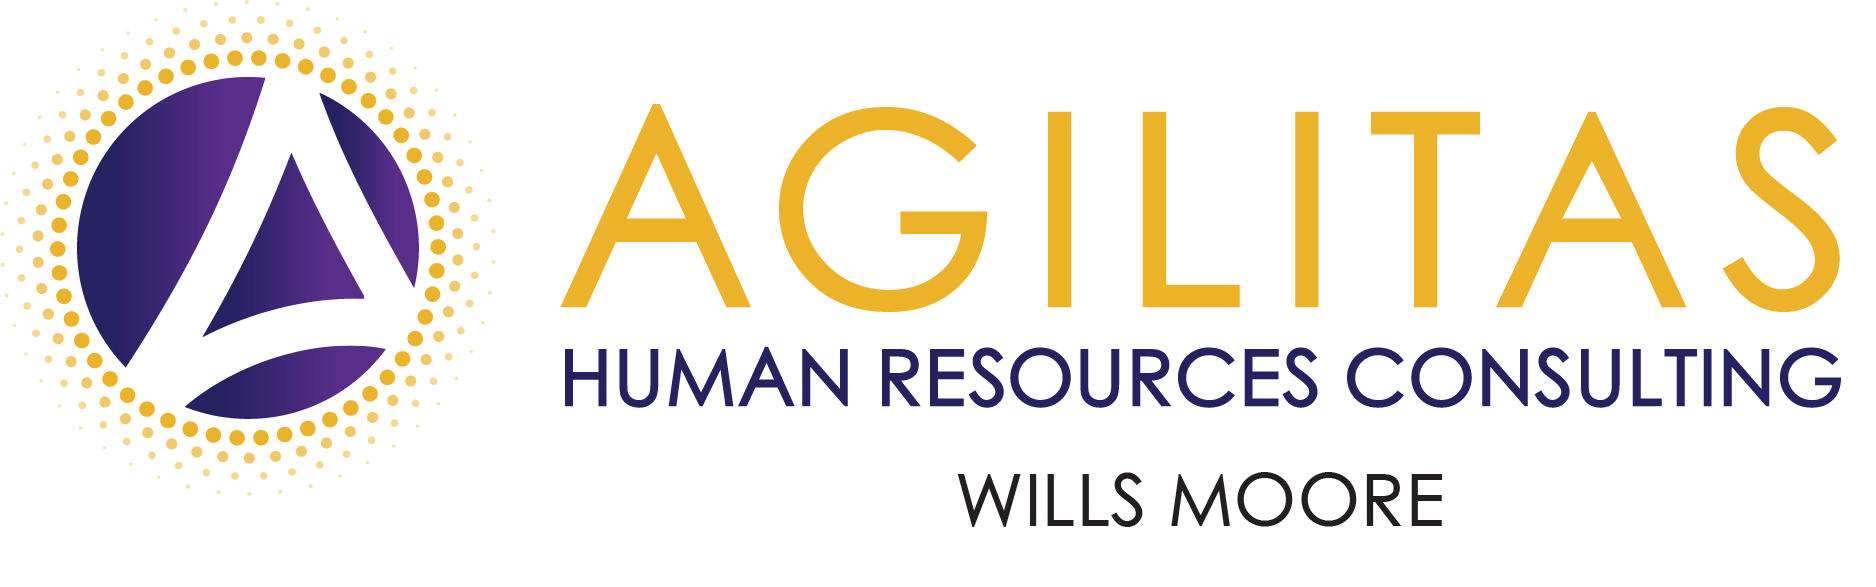 Agilitas Human Resources Consulting Wills Moore